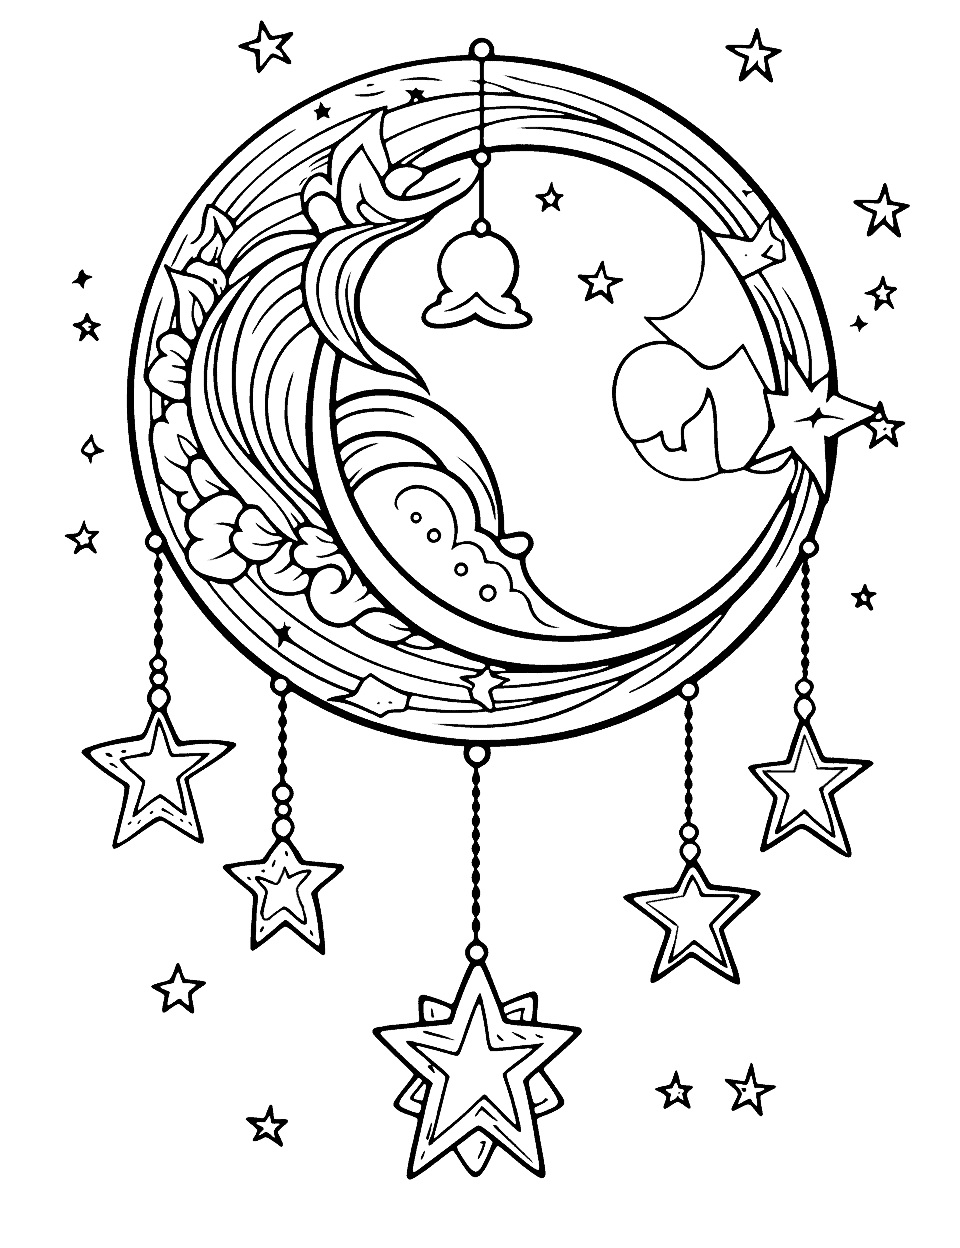 Dream Catcher in the Sky Adult Coloring Page - A detailed dream catcher hanging in the night sky, surrounded by stars and the moon.